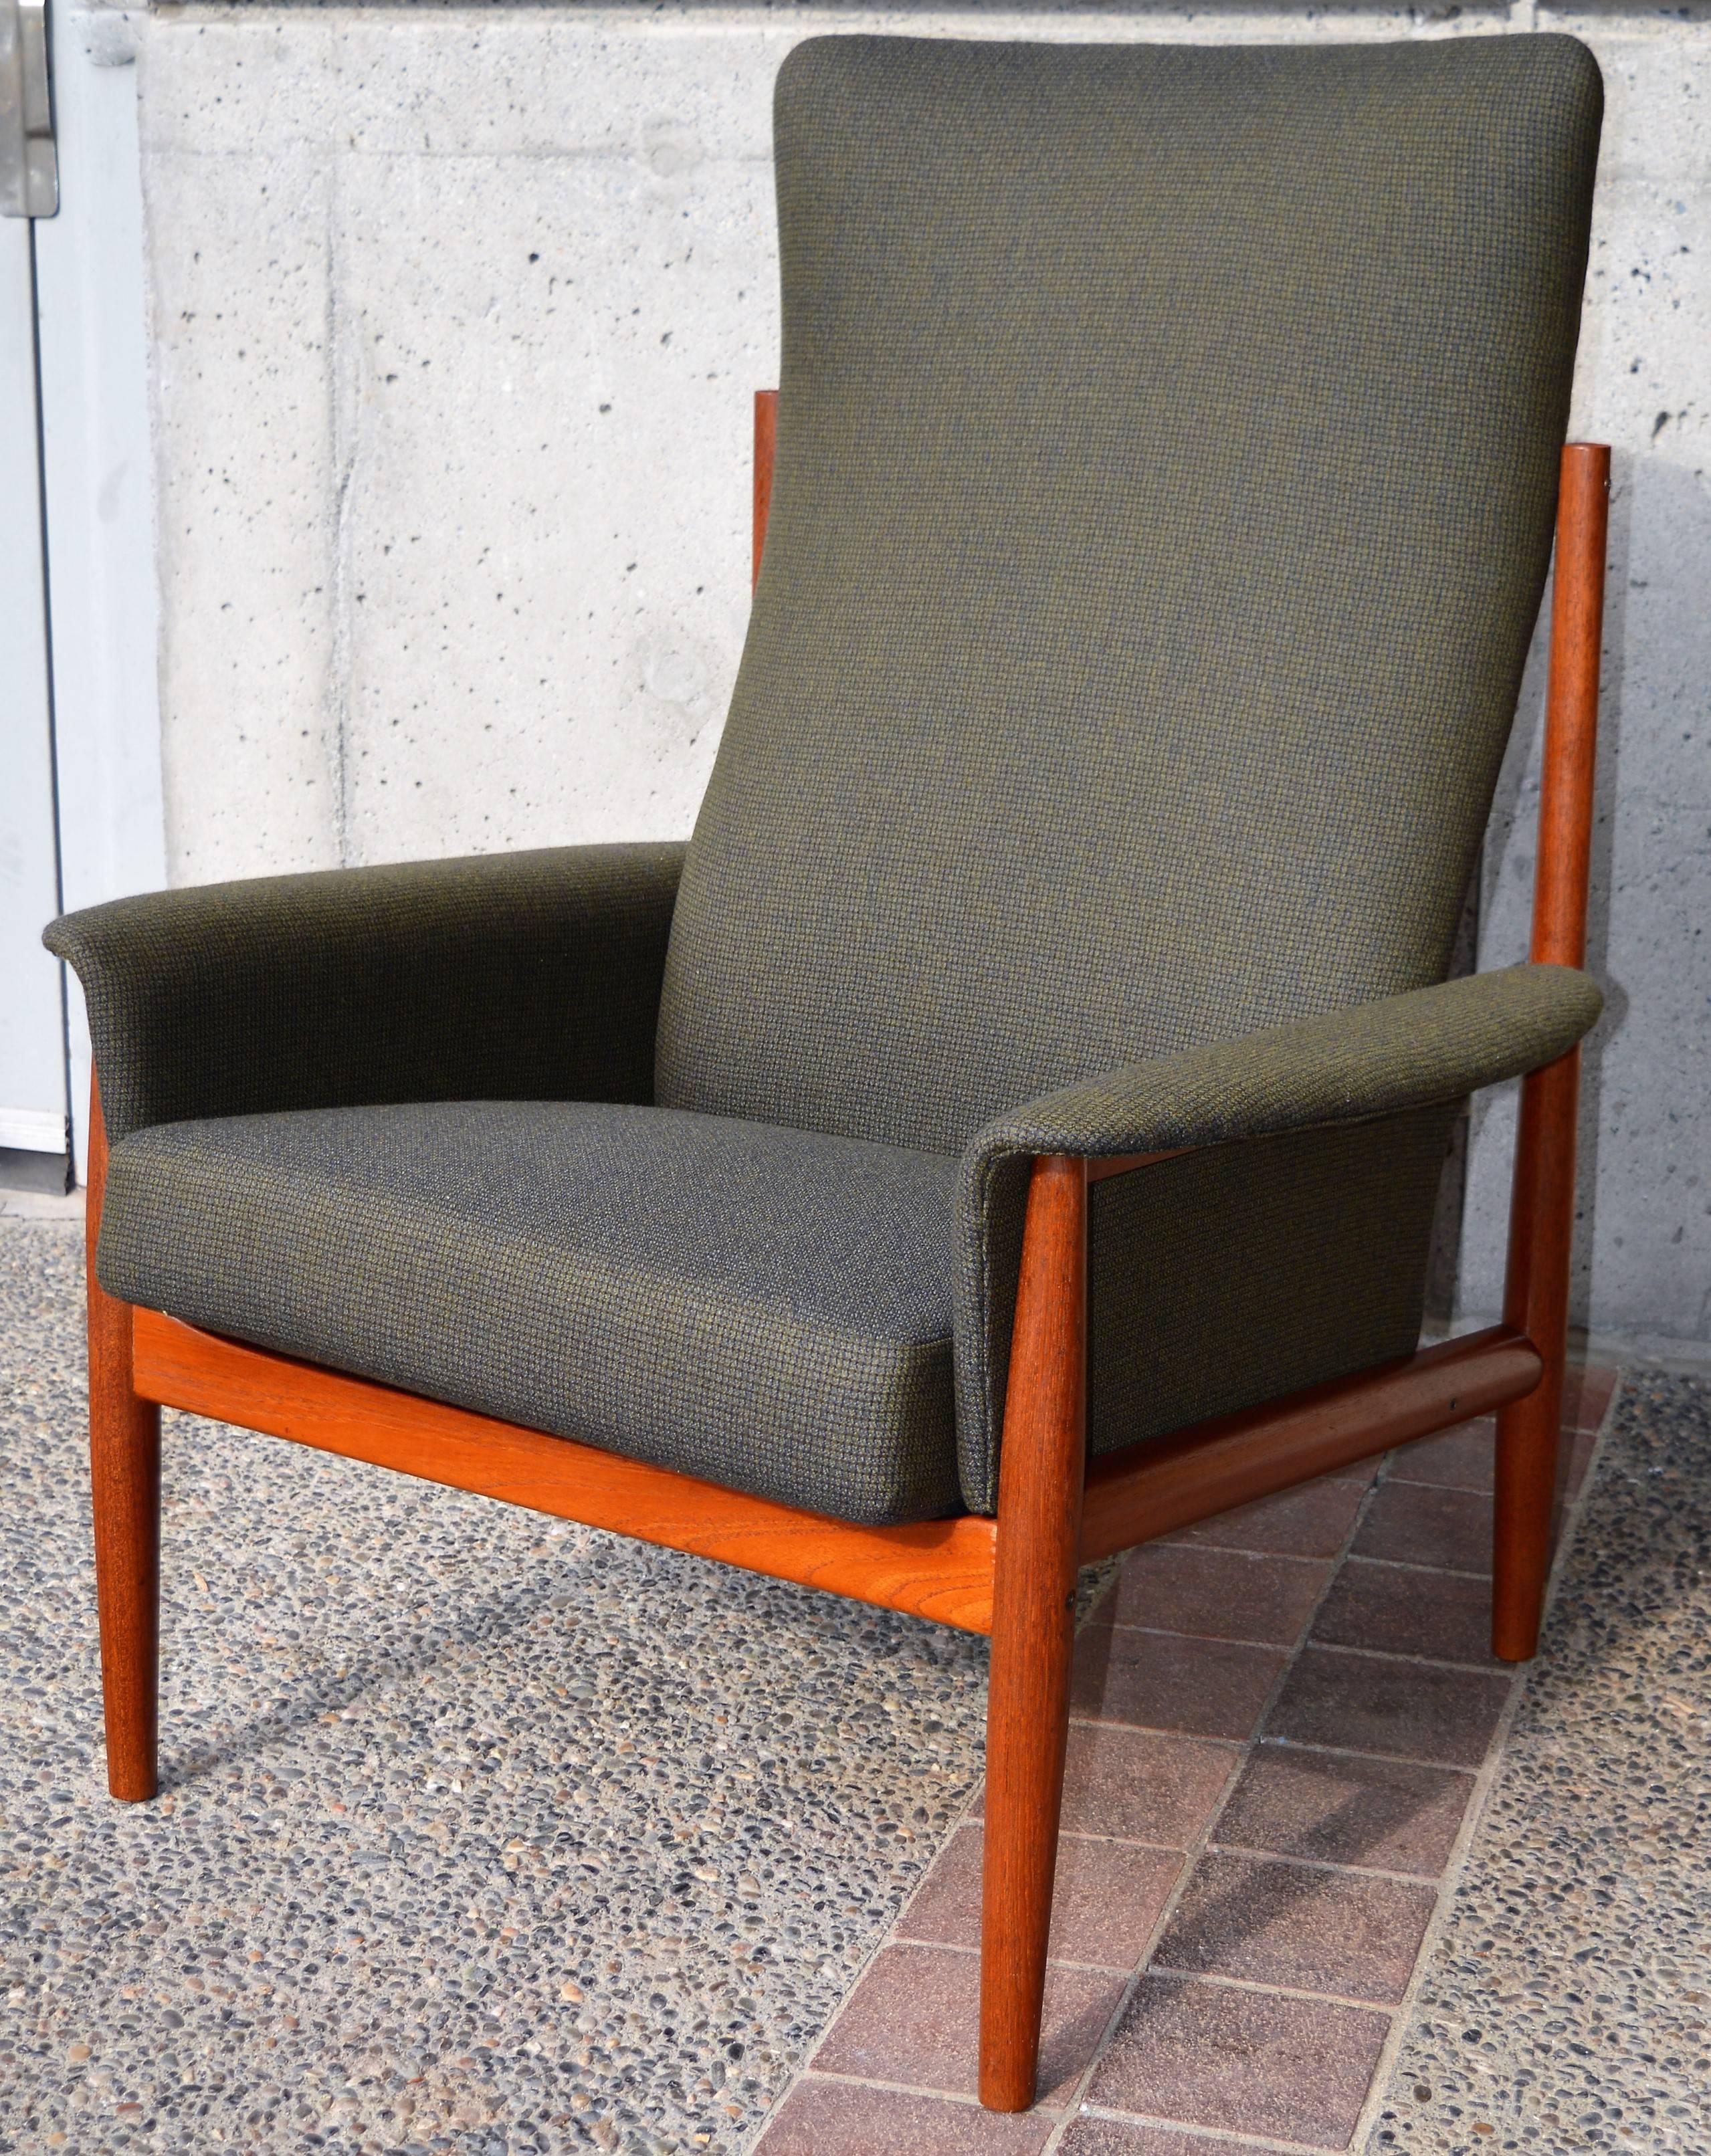 This phenomenal Danish modern rare teak tall back lounge chair was designed by Grete Jalk in the 1960s and manufactured by France & Son. Featuring beautifully contoured upholstered armrests, a thin profile sprung backrest that contours for lumbar